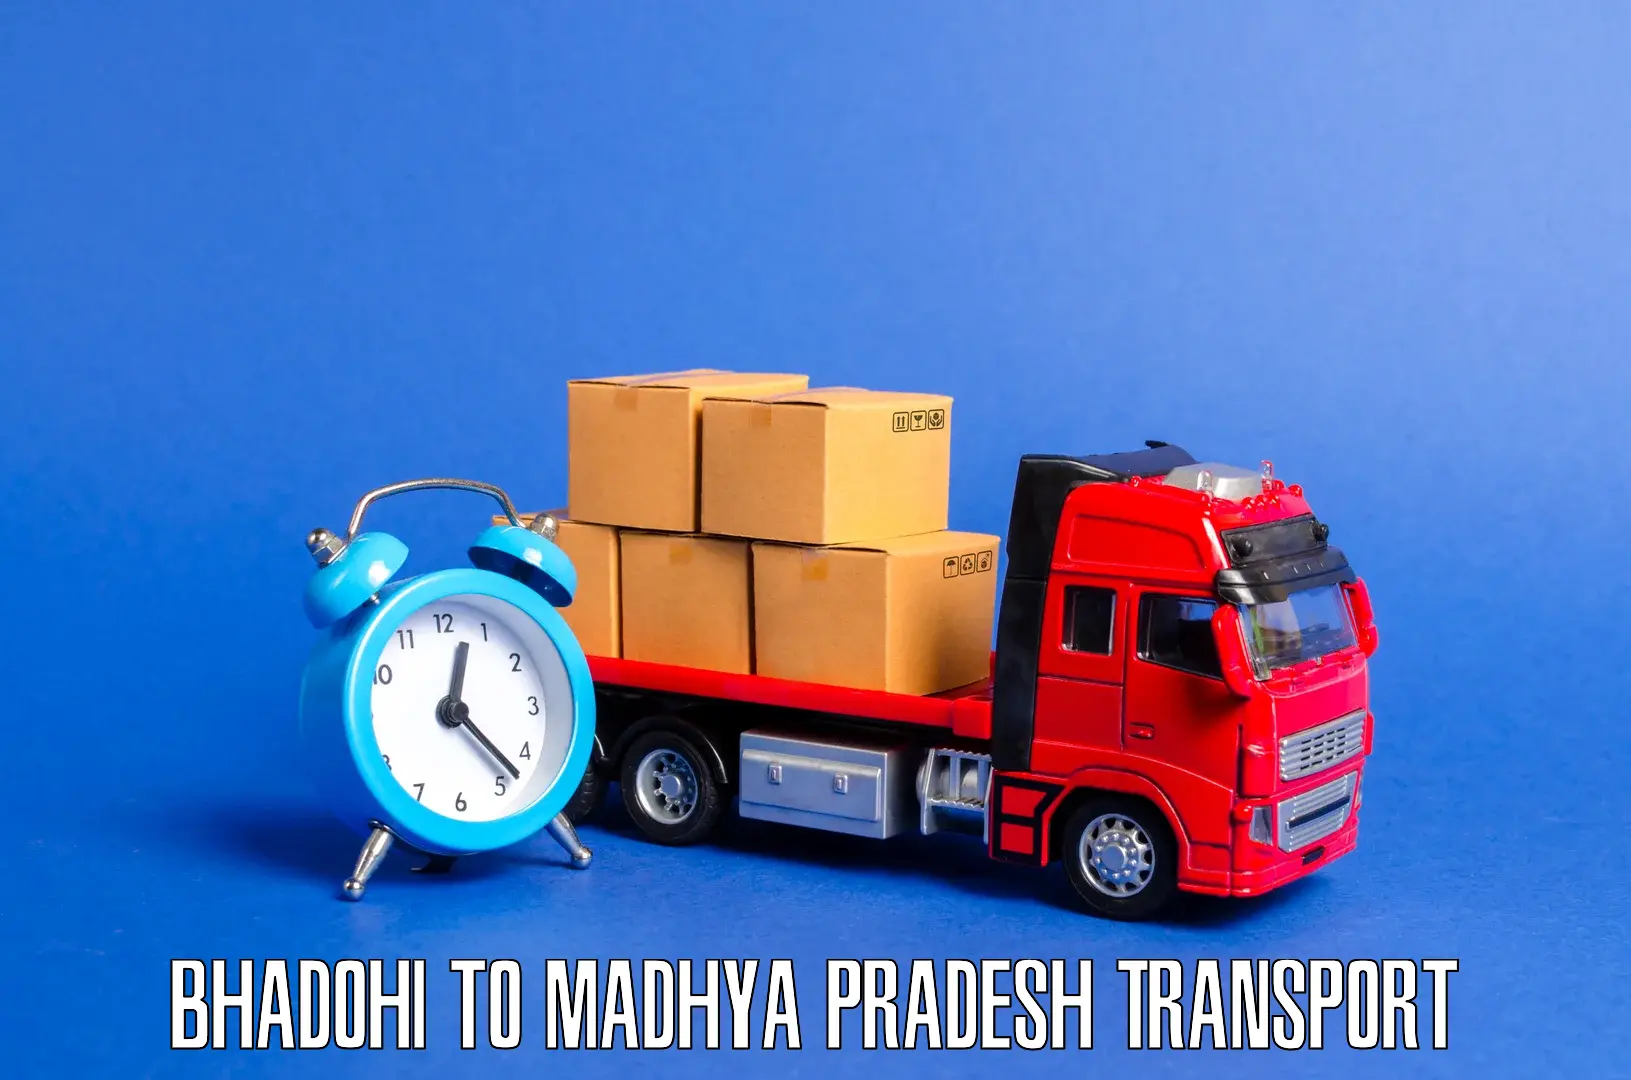 Cargo train transport services Bhadohi to Anuppur